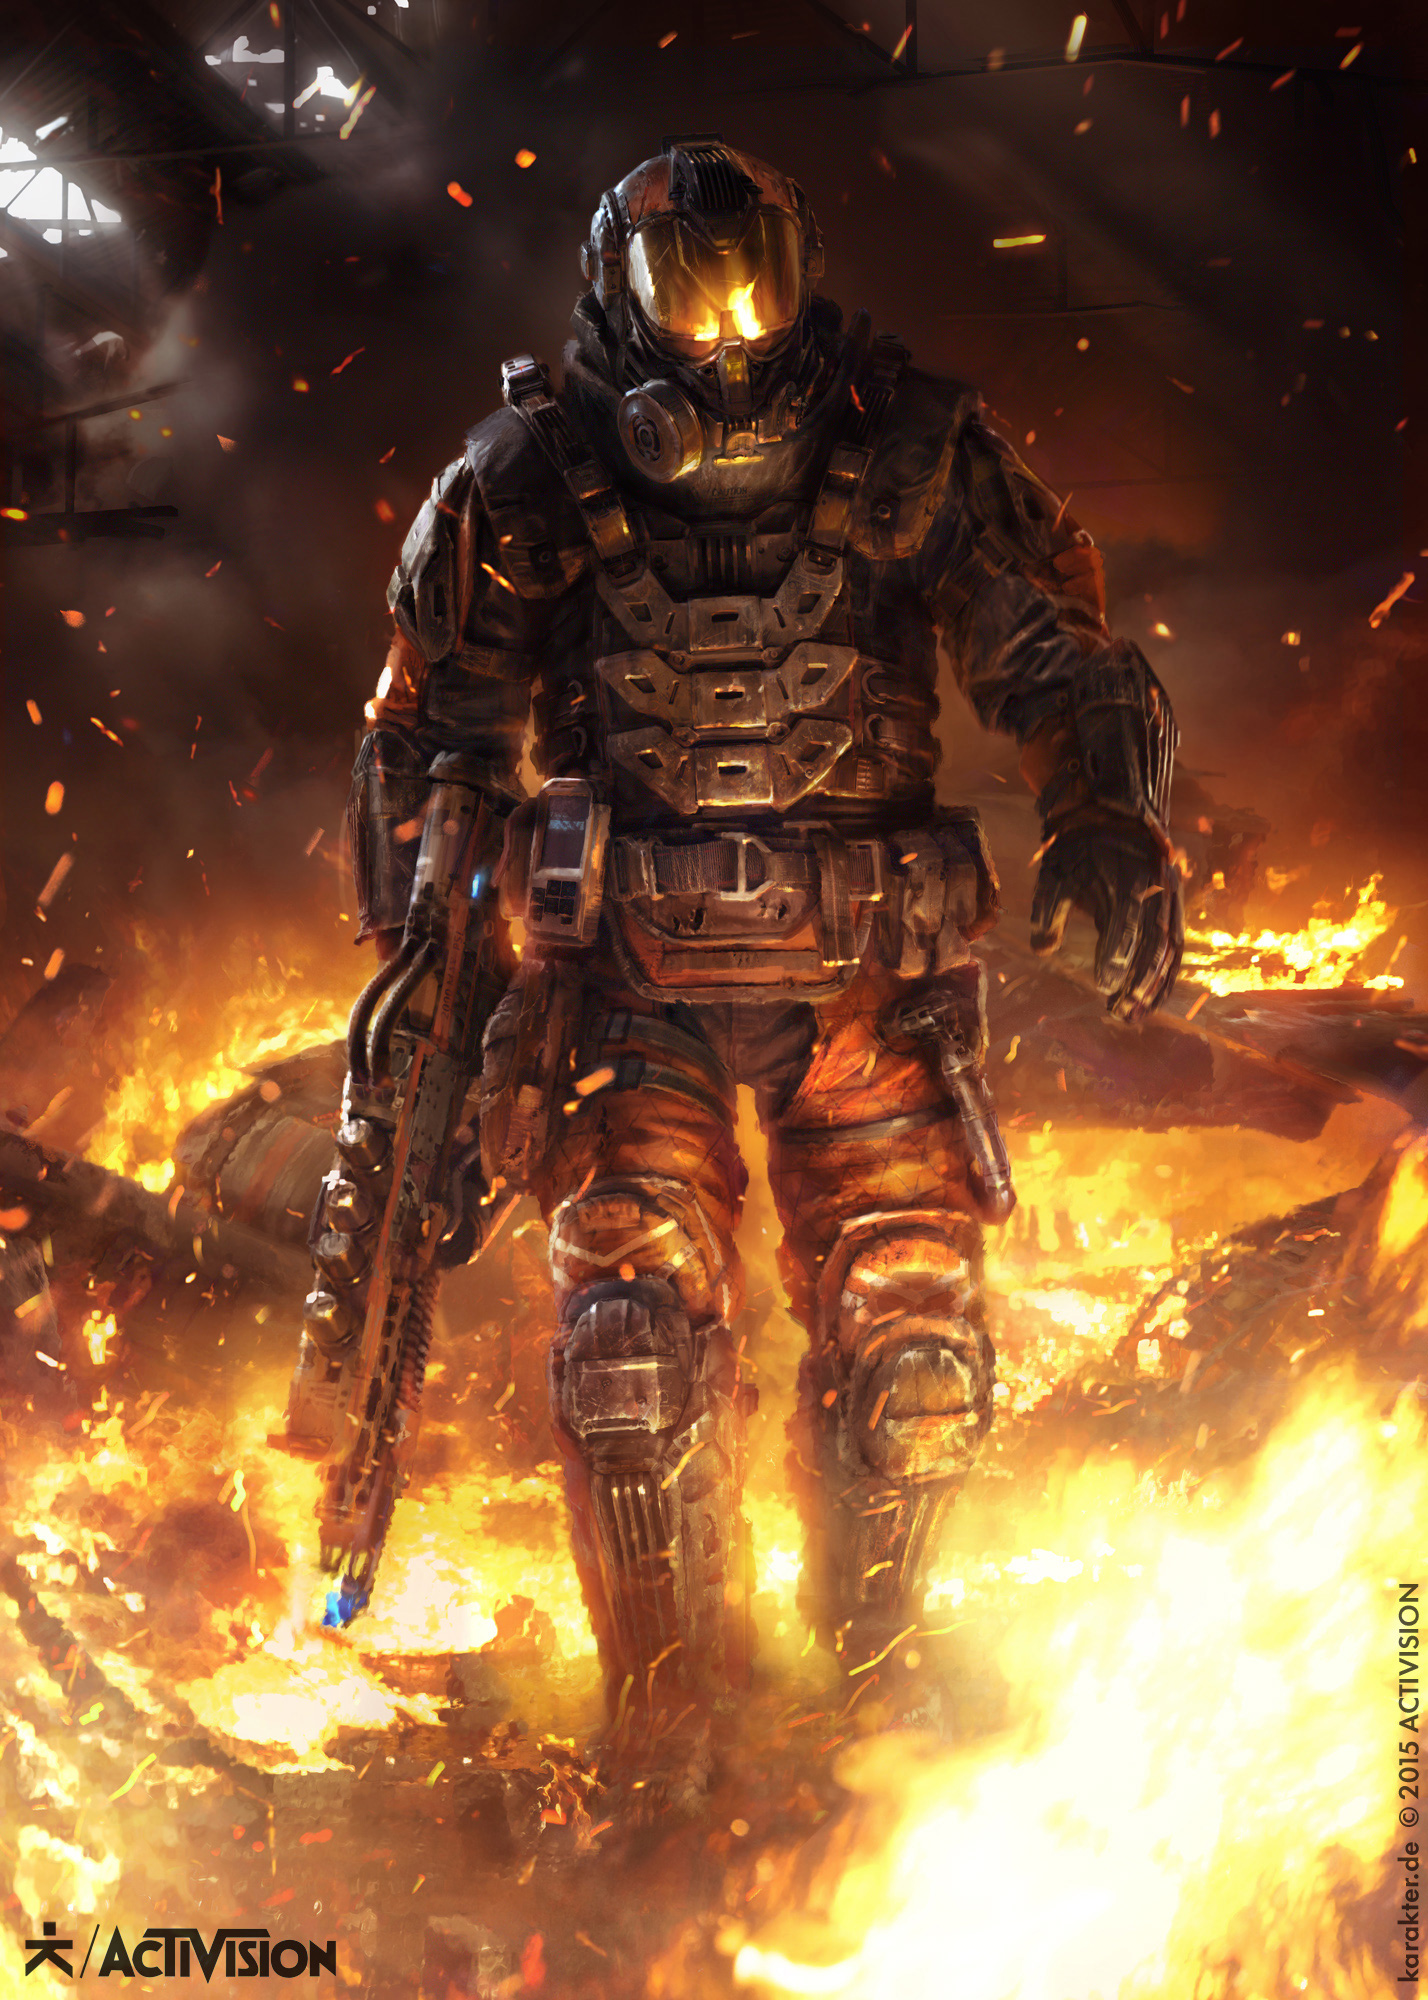 cod black ops 3 wallpaper,action adventure game,fictional character,demon,pc game,cg artwork